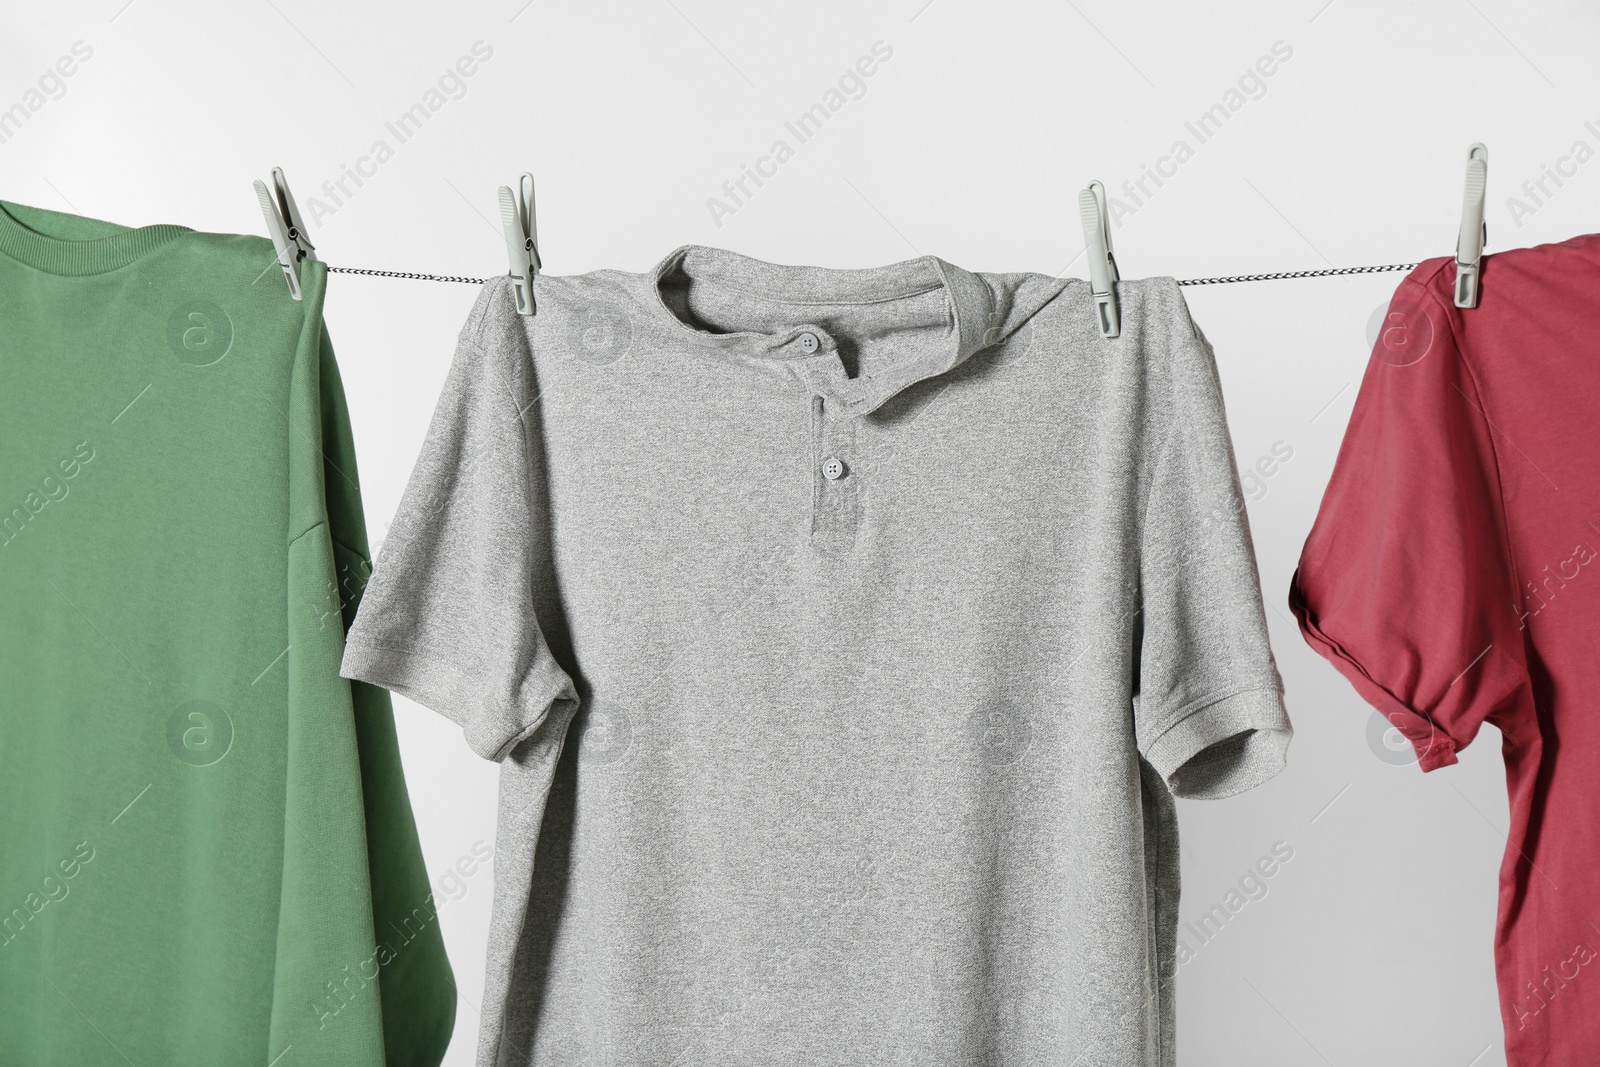 Photo of Different shirts drying on laundry line against light background, closeup